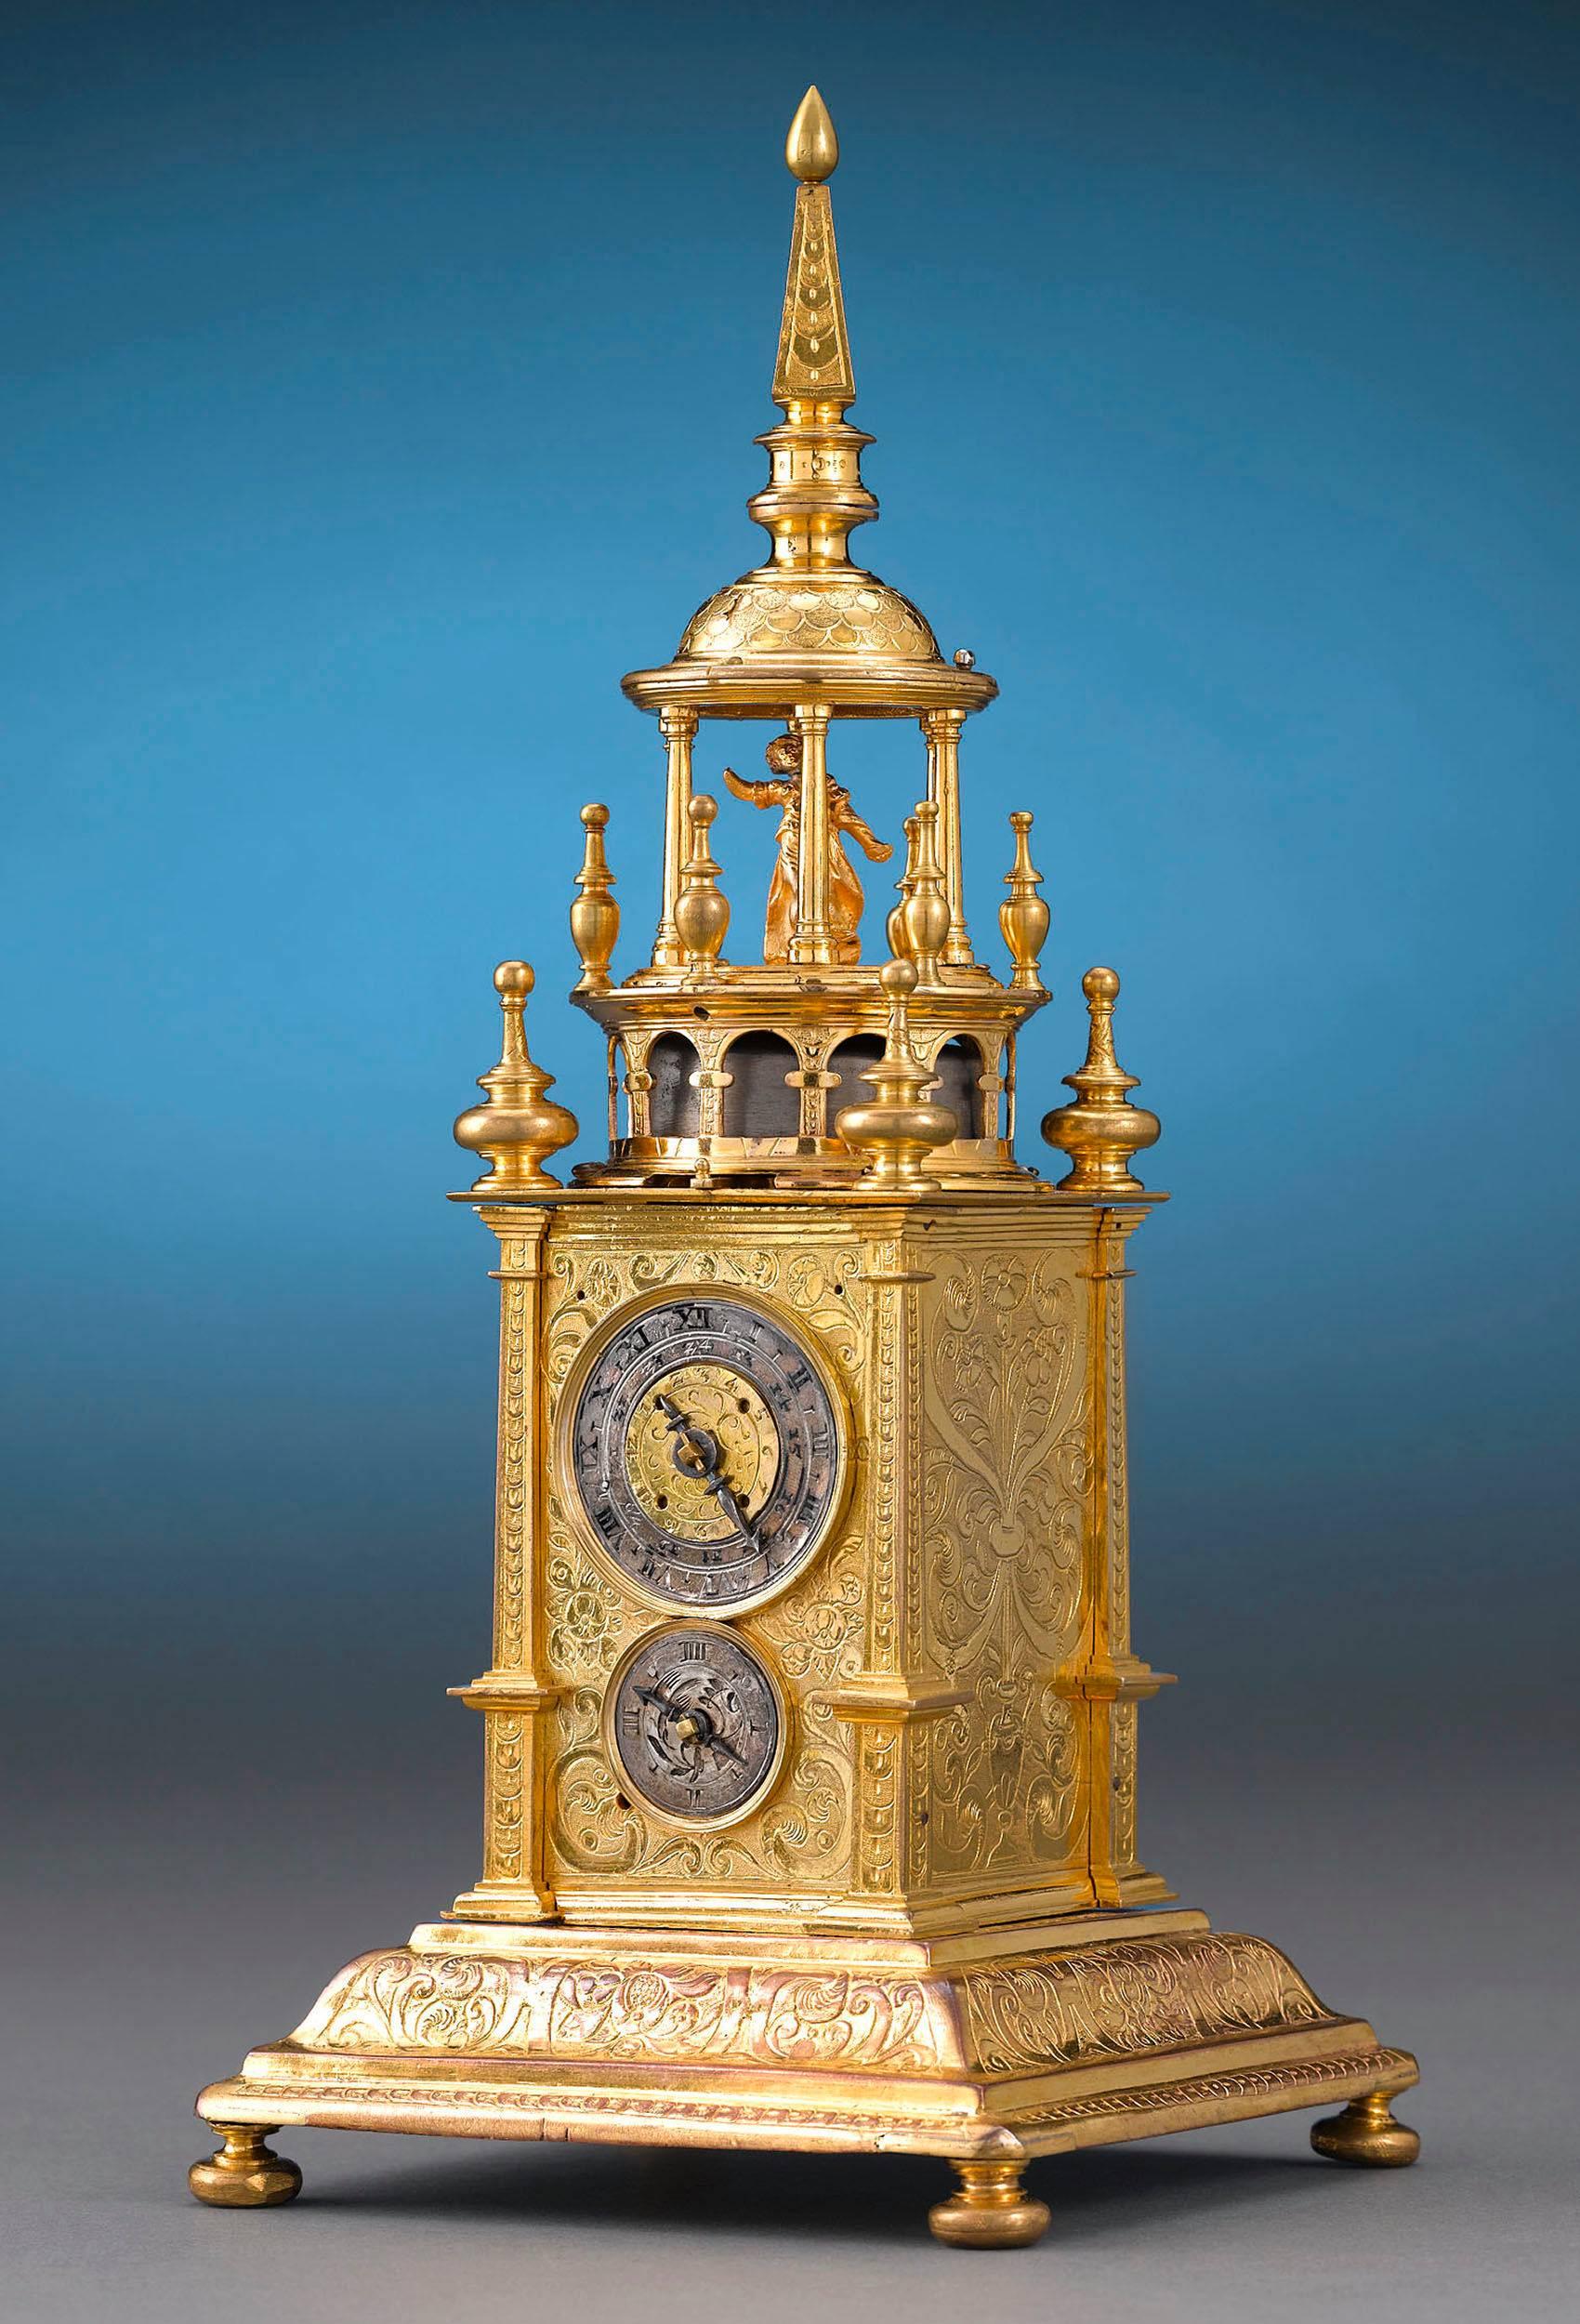 This immensely rare Renaissance turret-form clock, or table clock, was considered both a scientific marvel and an item of luxury during the period. This incredible piece is encased in fire gilt brass crafted to resemble the giant striking clocks set